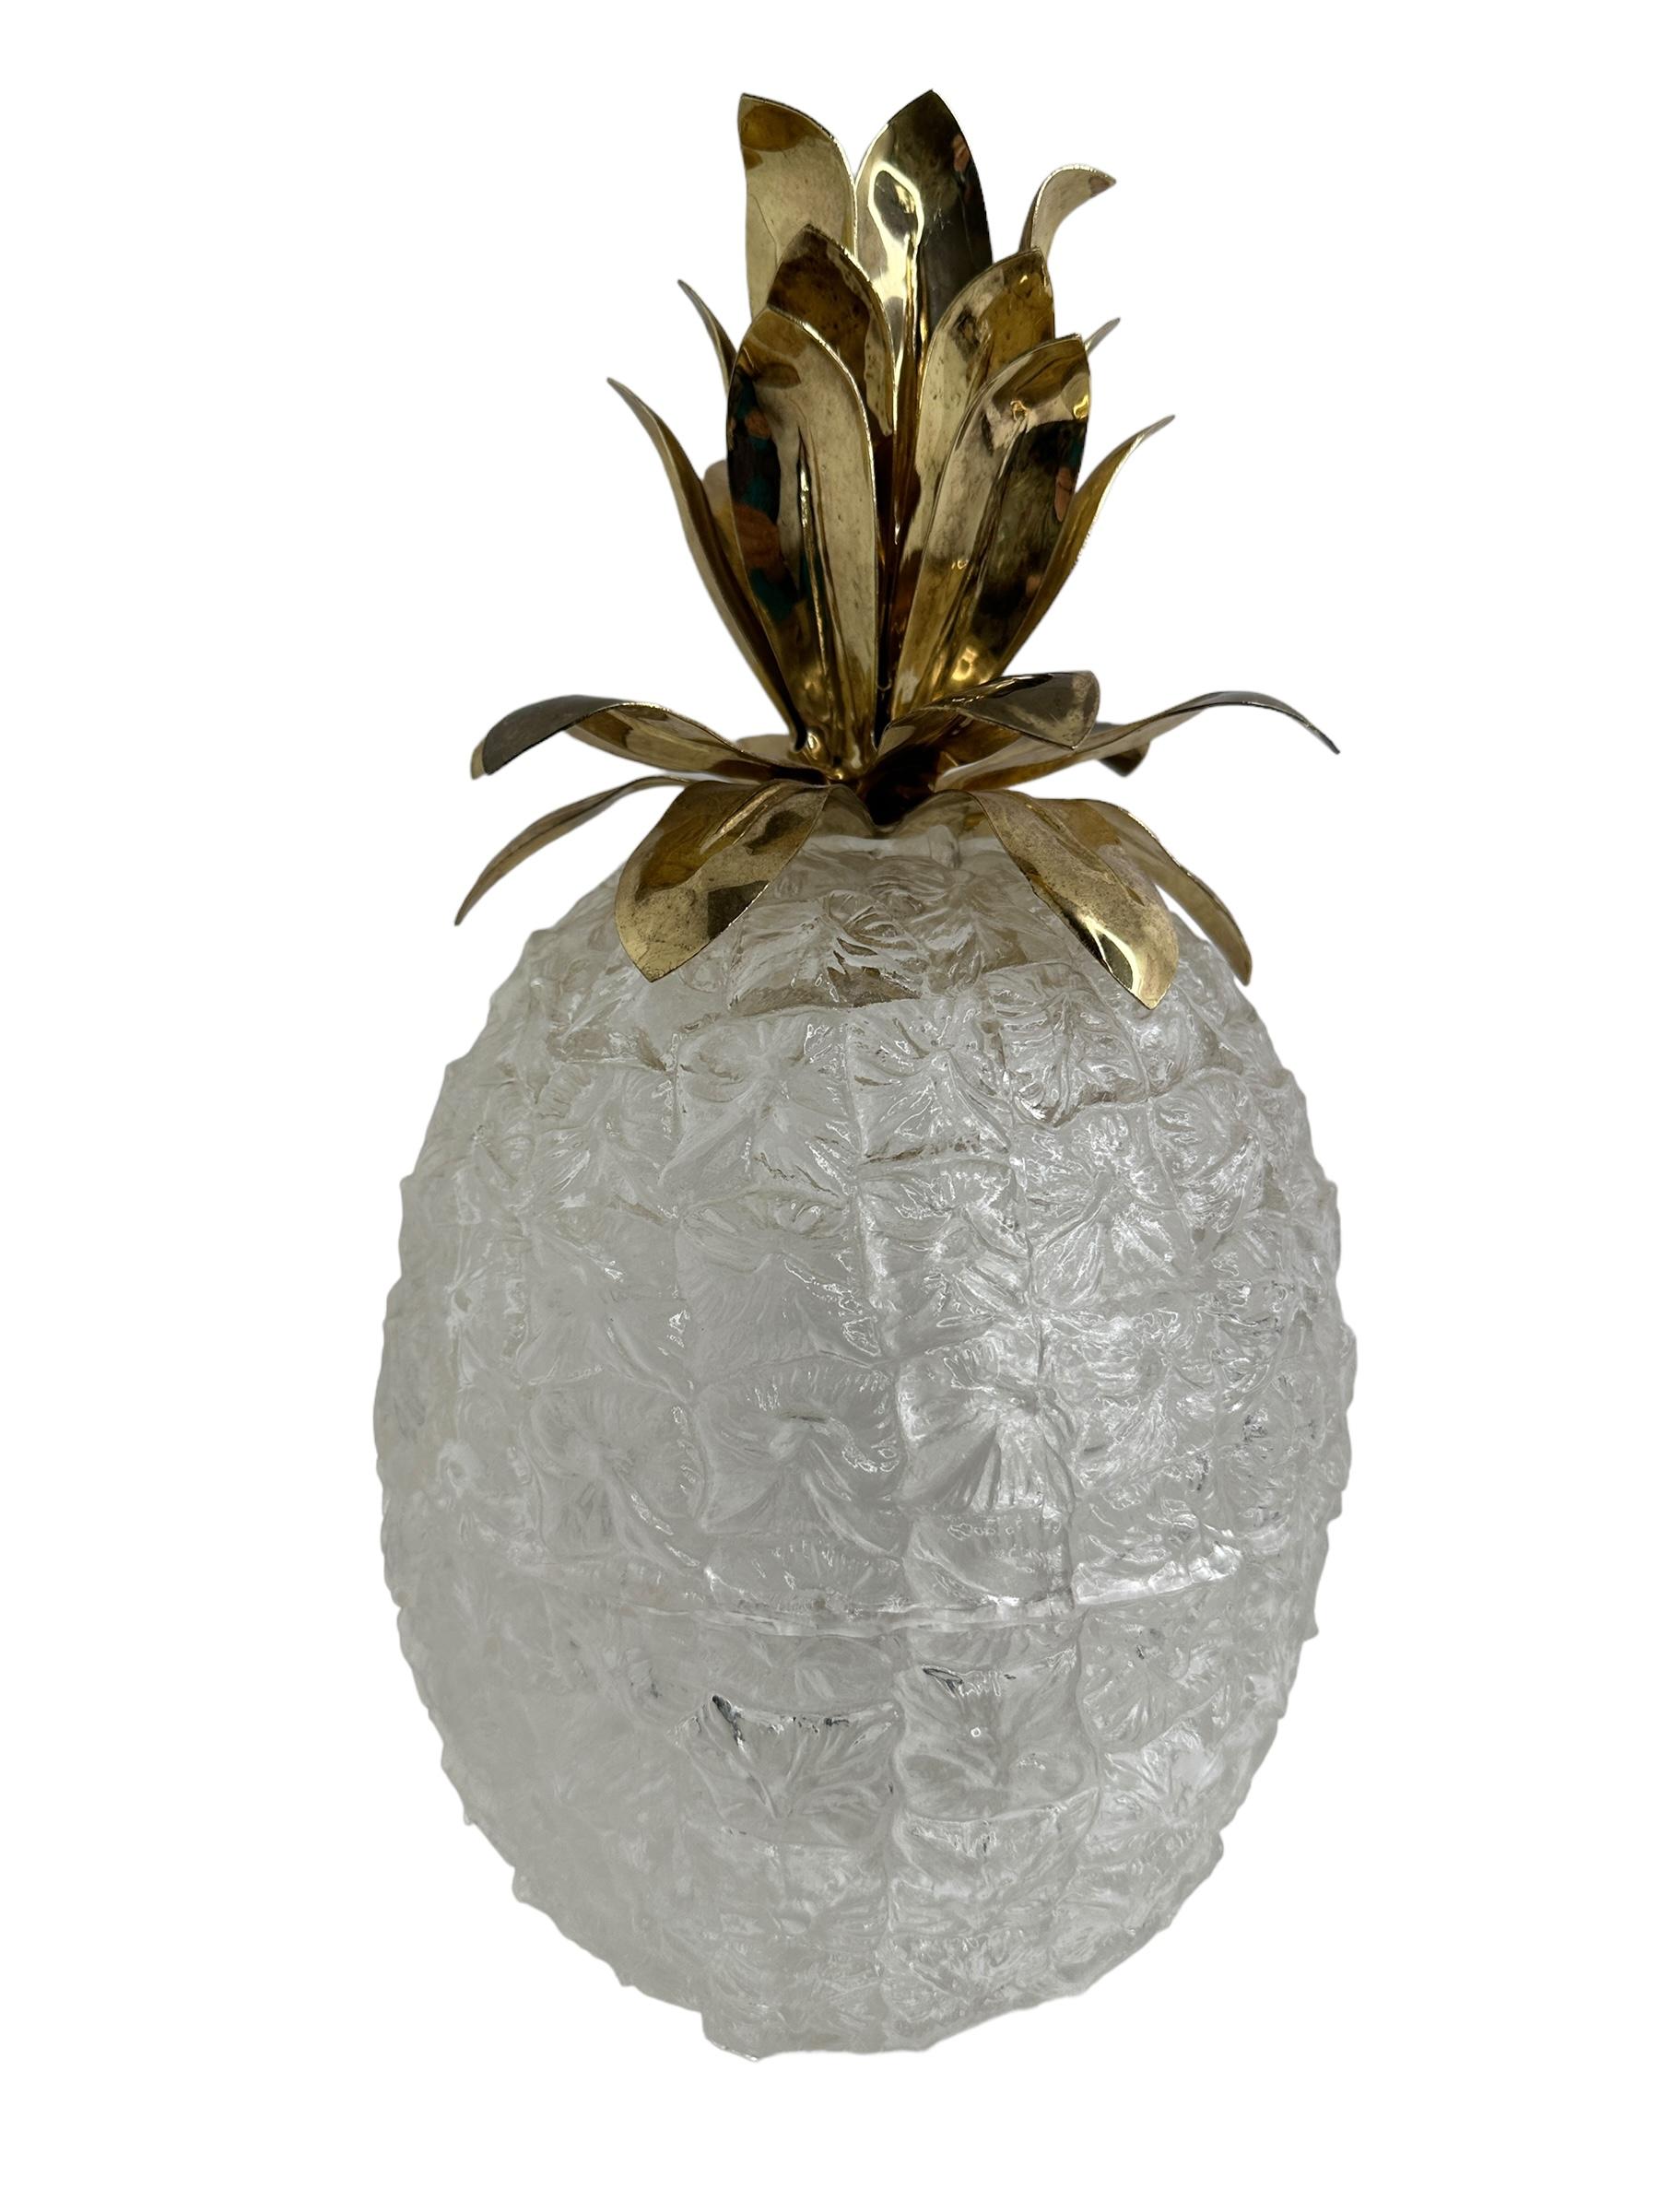 A nice barware item, made in the1970s. An all original Lucite and gold plated metal item to display in your bar or just on a cupboard for your ice cubes. Lucite or acrylic glass, in the shape of a pineapple. Found at an Estate Sale in Nuremberg,